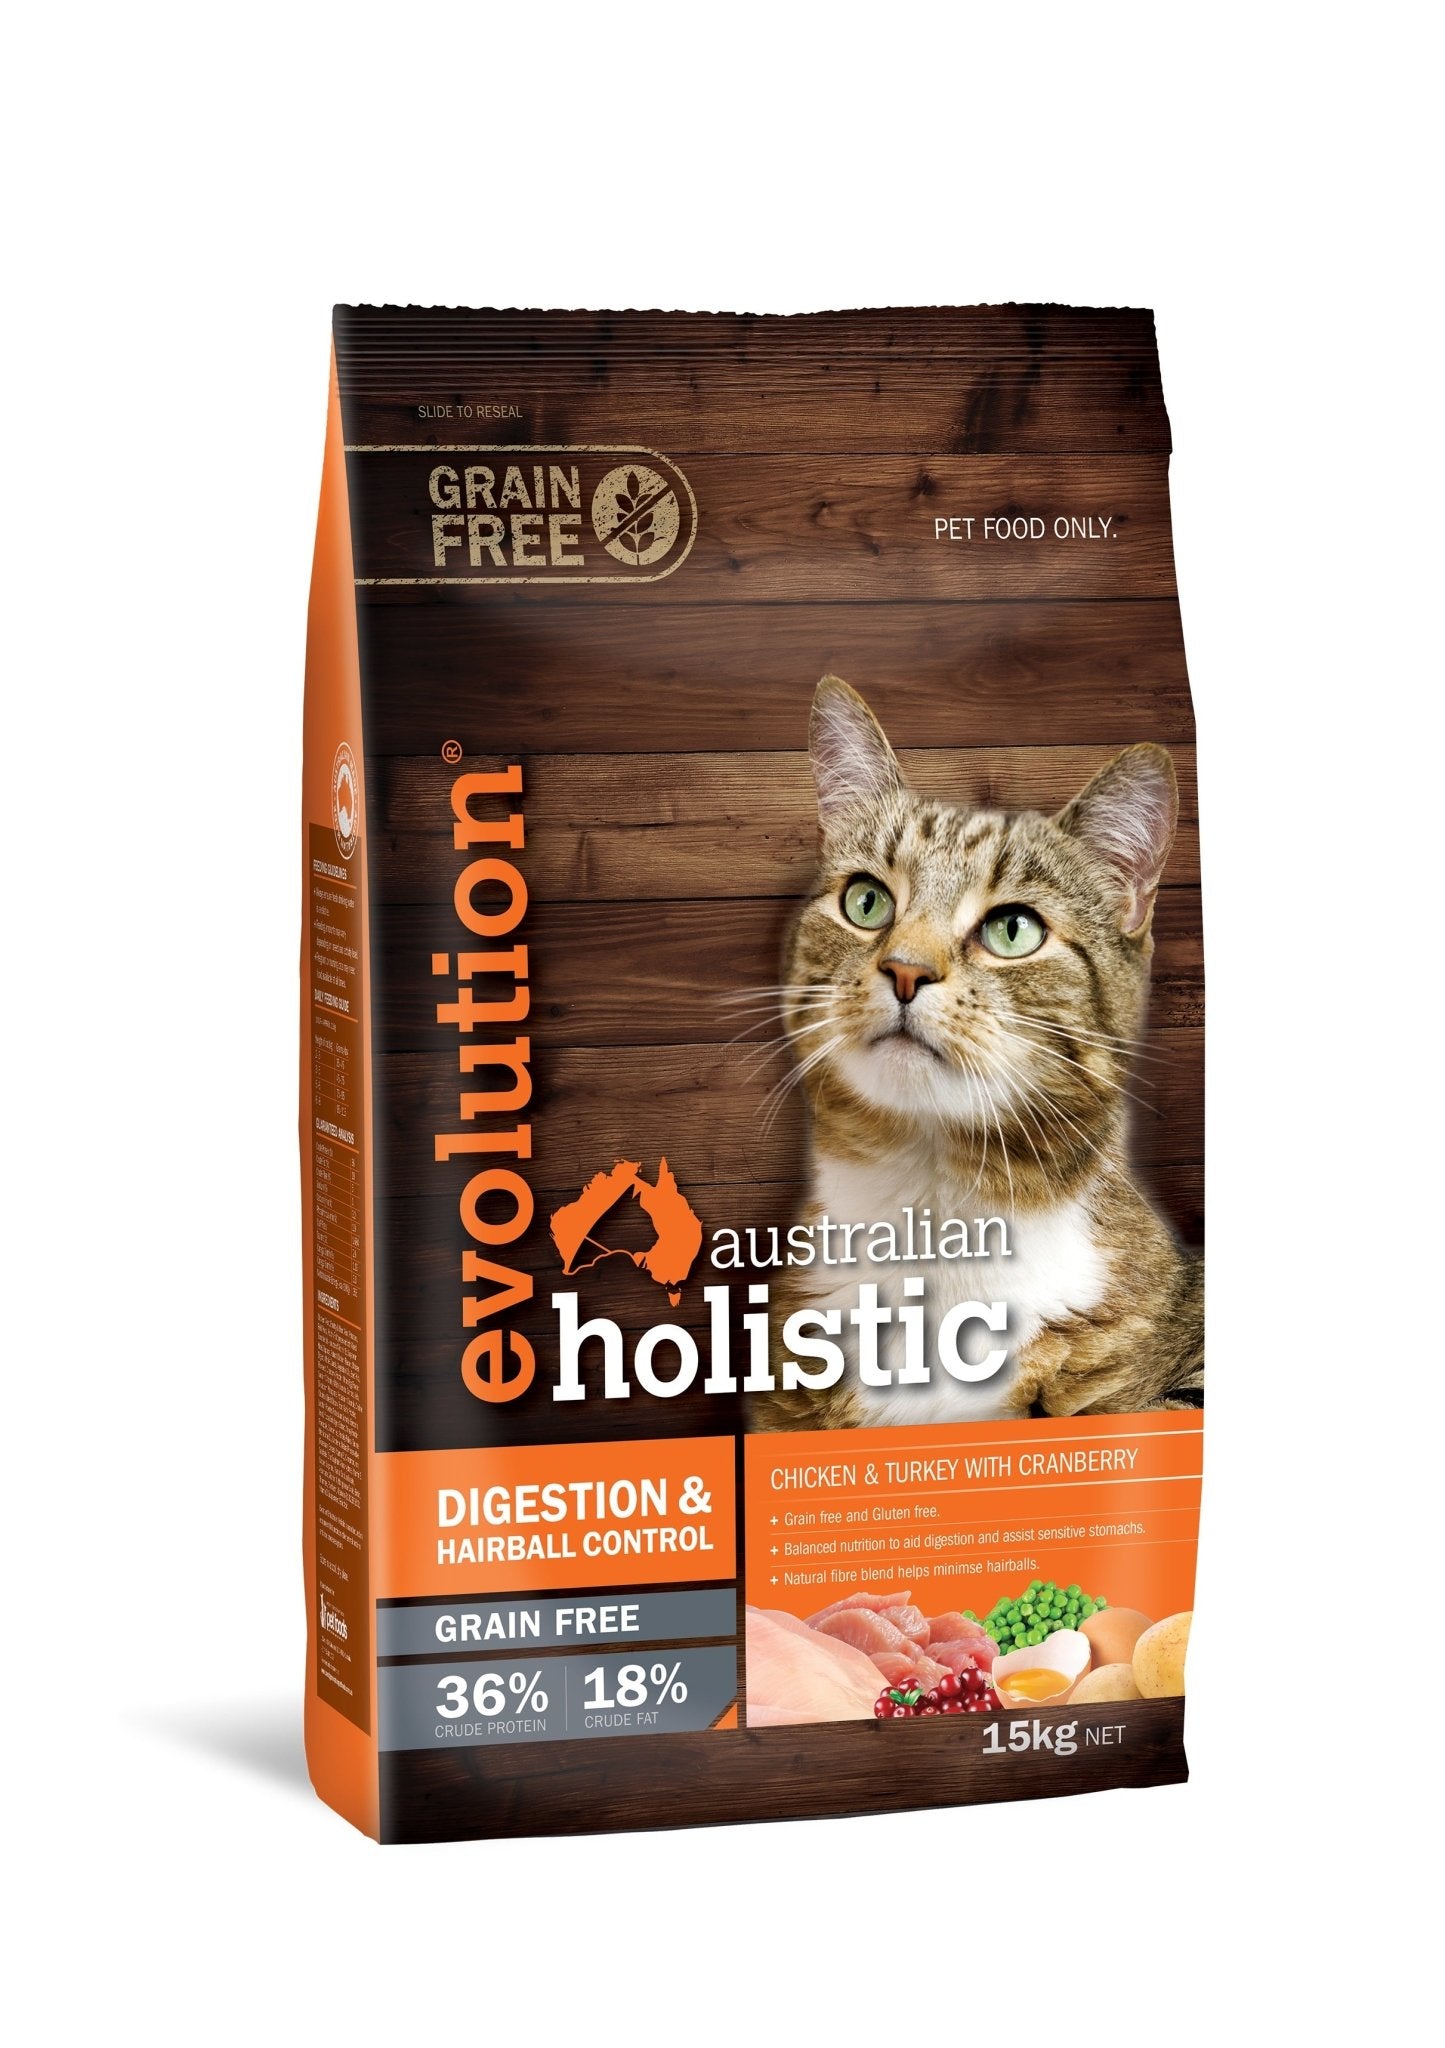 Evolution Holistic Cat Digestion & Hairball Control "Grain Free" - 15KG - Cat Food - Mountains Natural Pet Foods